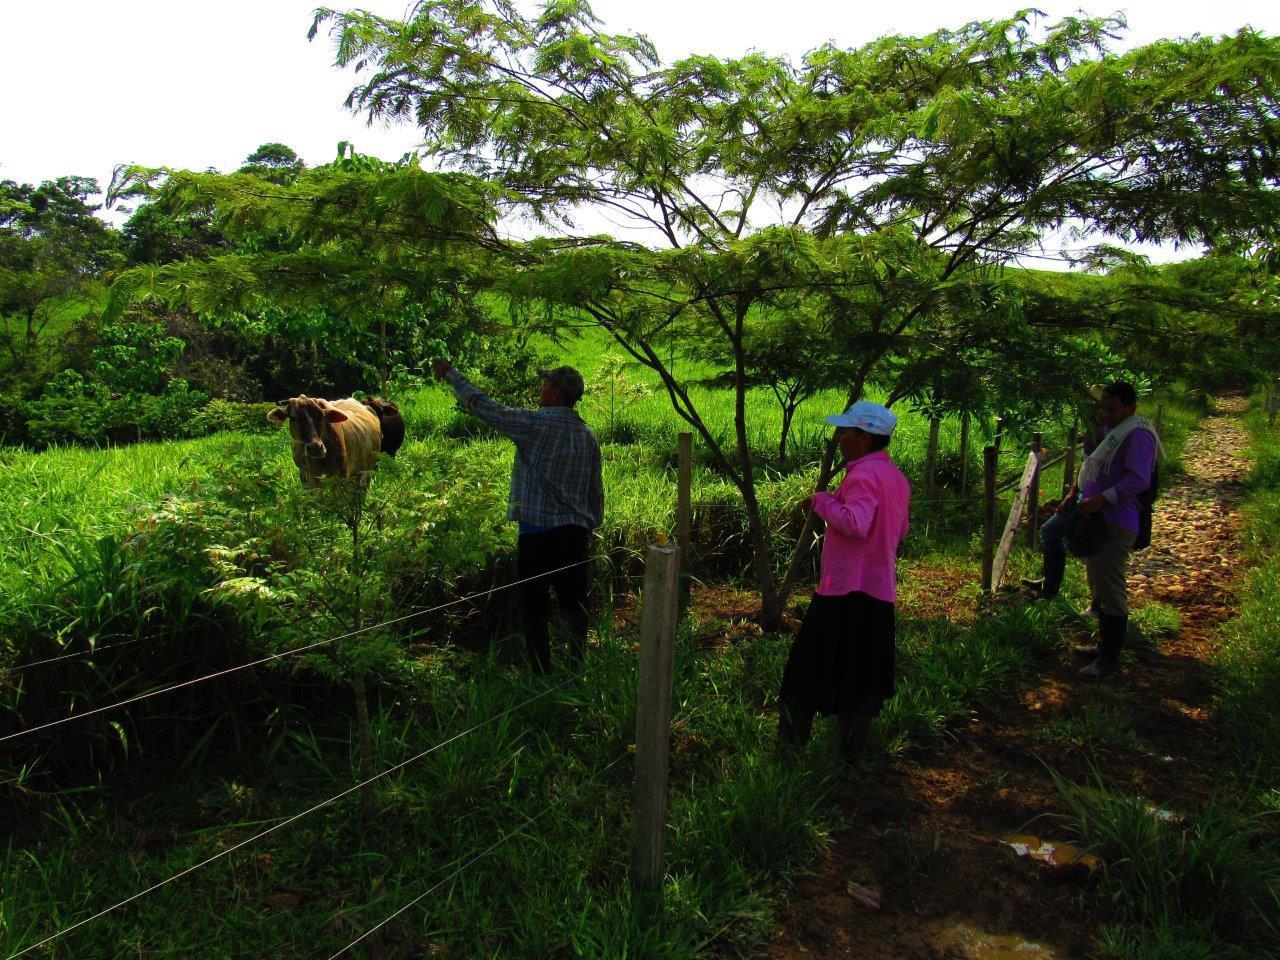 Women lead sustainable livestock farming near the Amazon Rainforest in Colombia  - Image 2